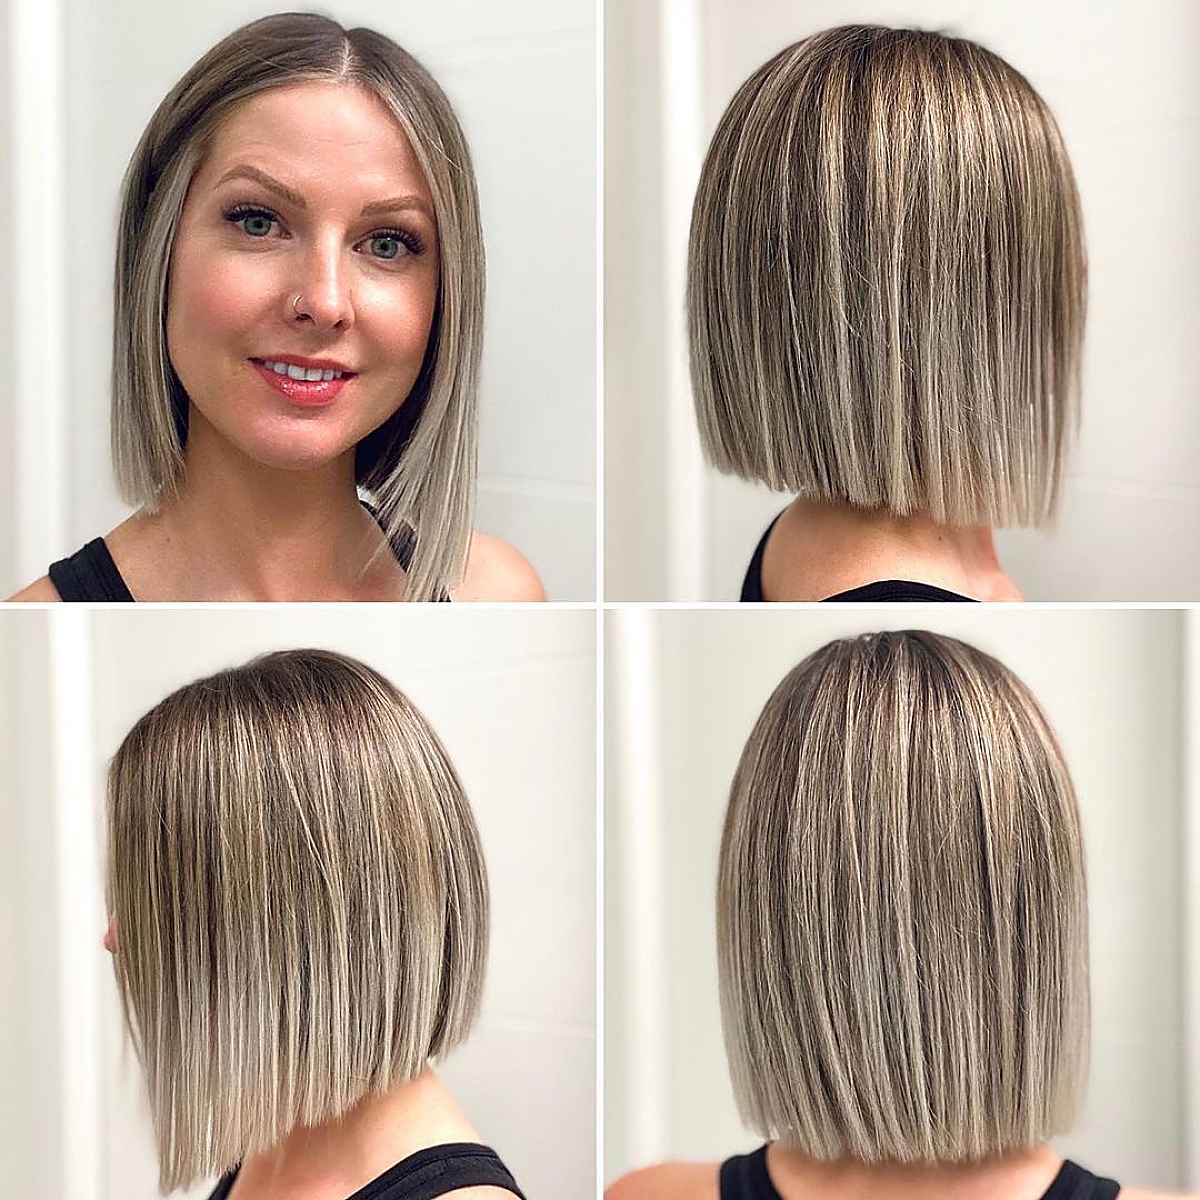 Professional Inverted Bob for 30-Year-Old Women